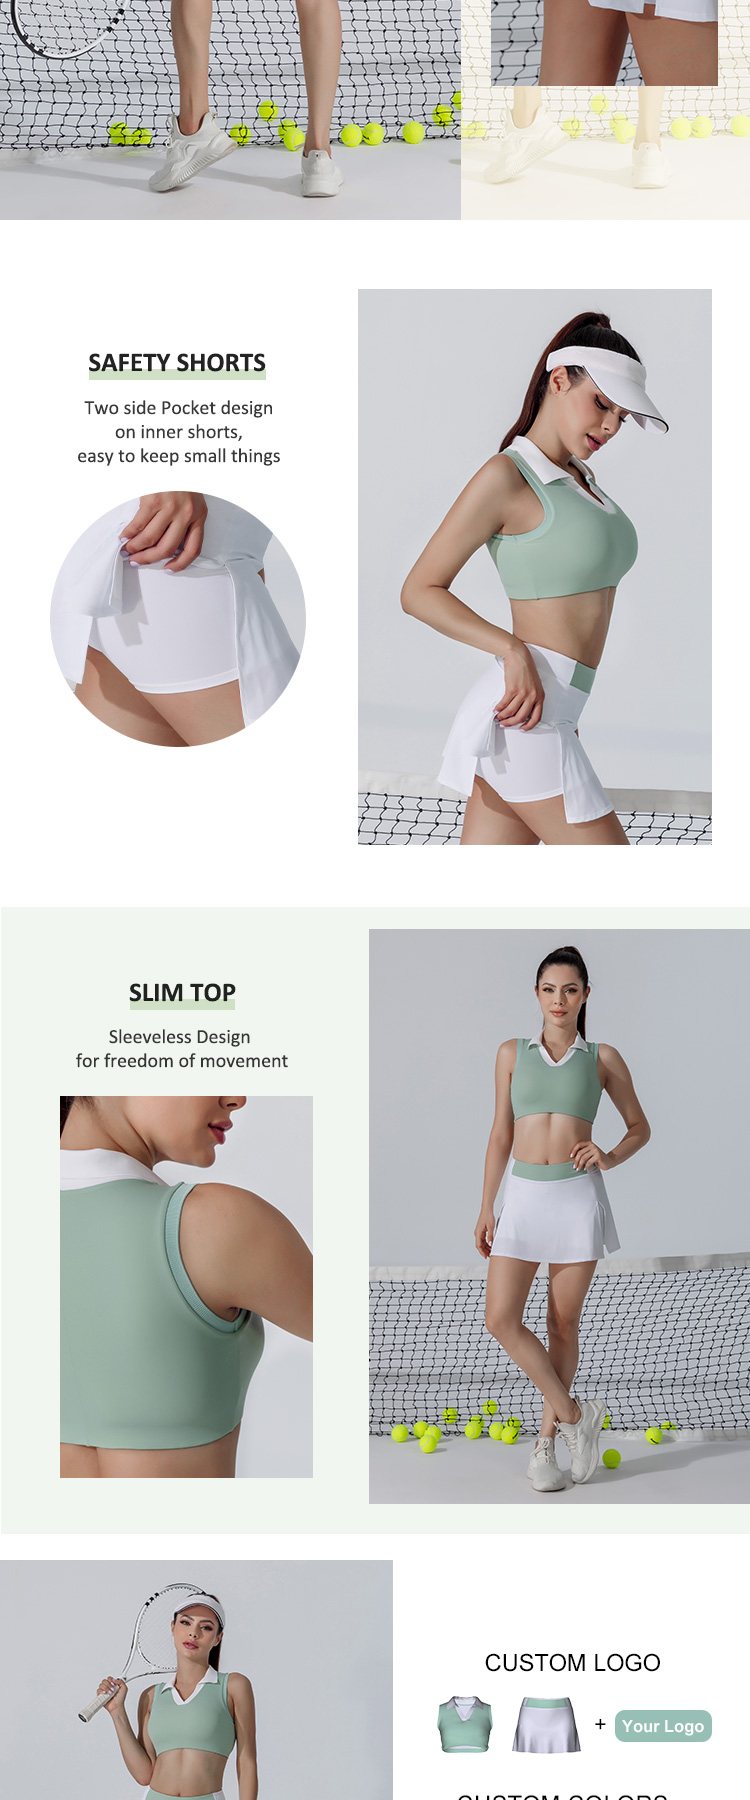 INGOR woman tennis wear production at the gym-4